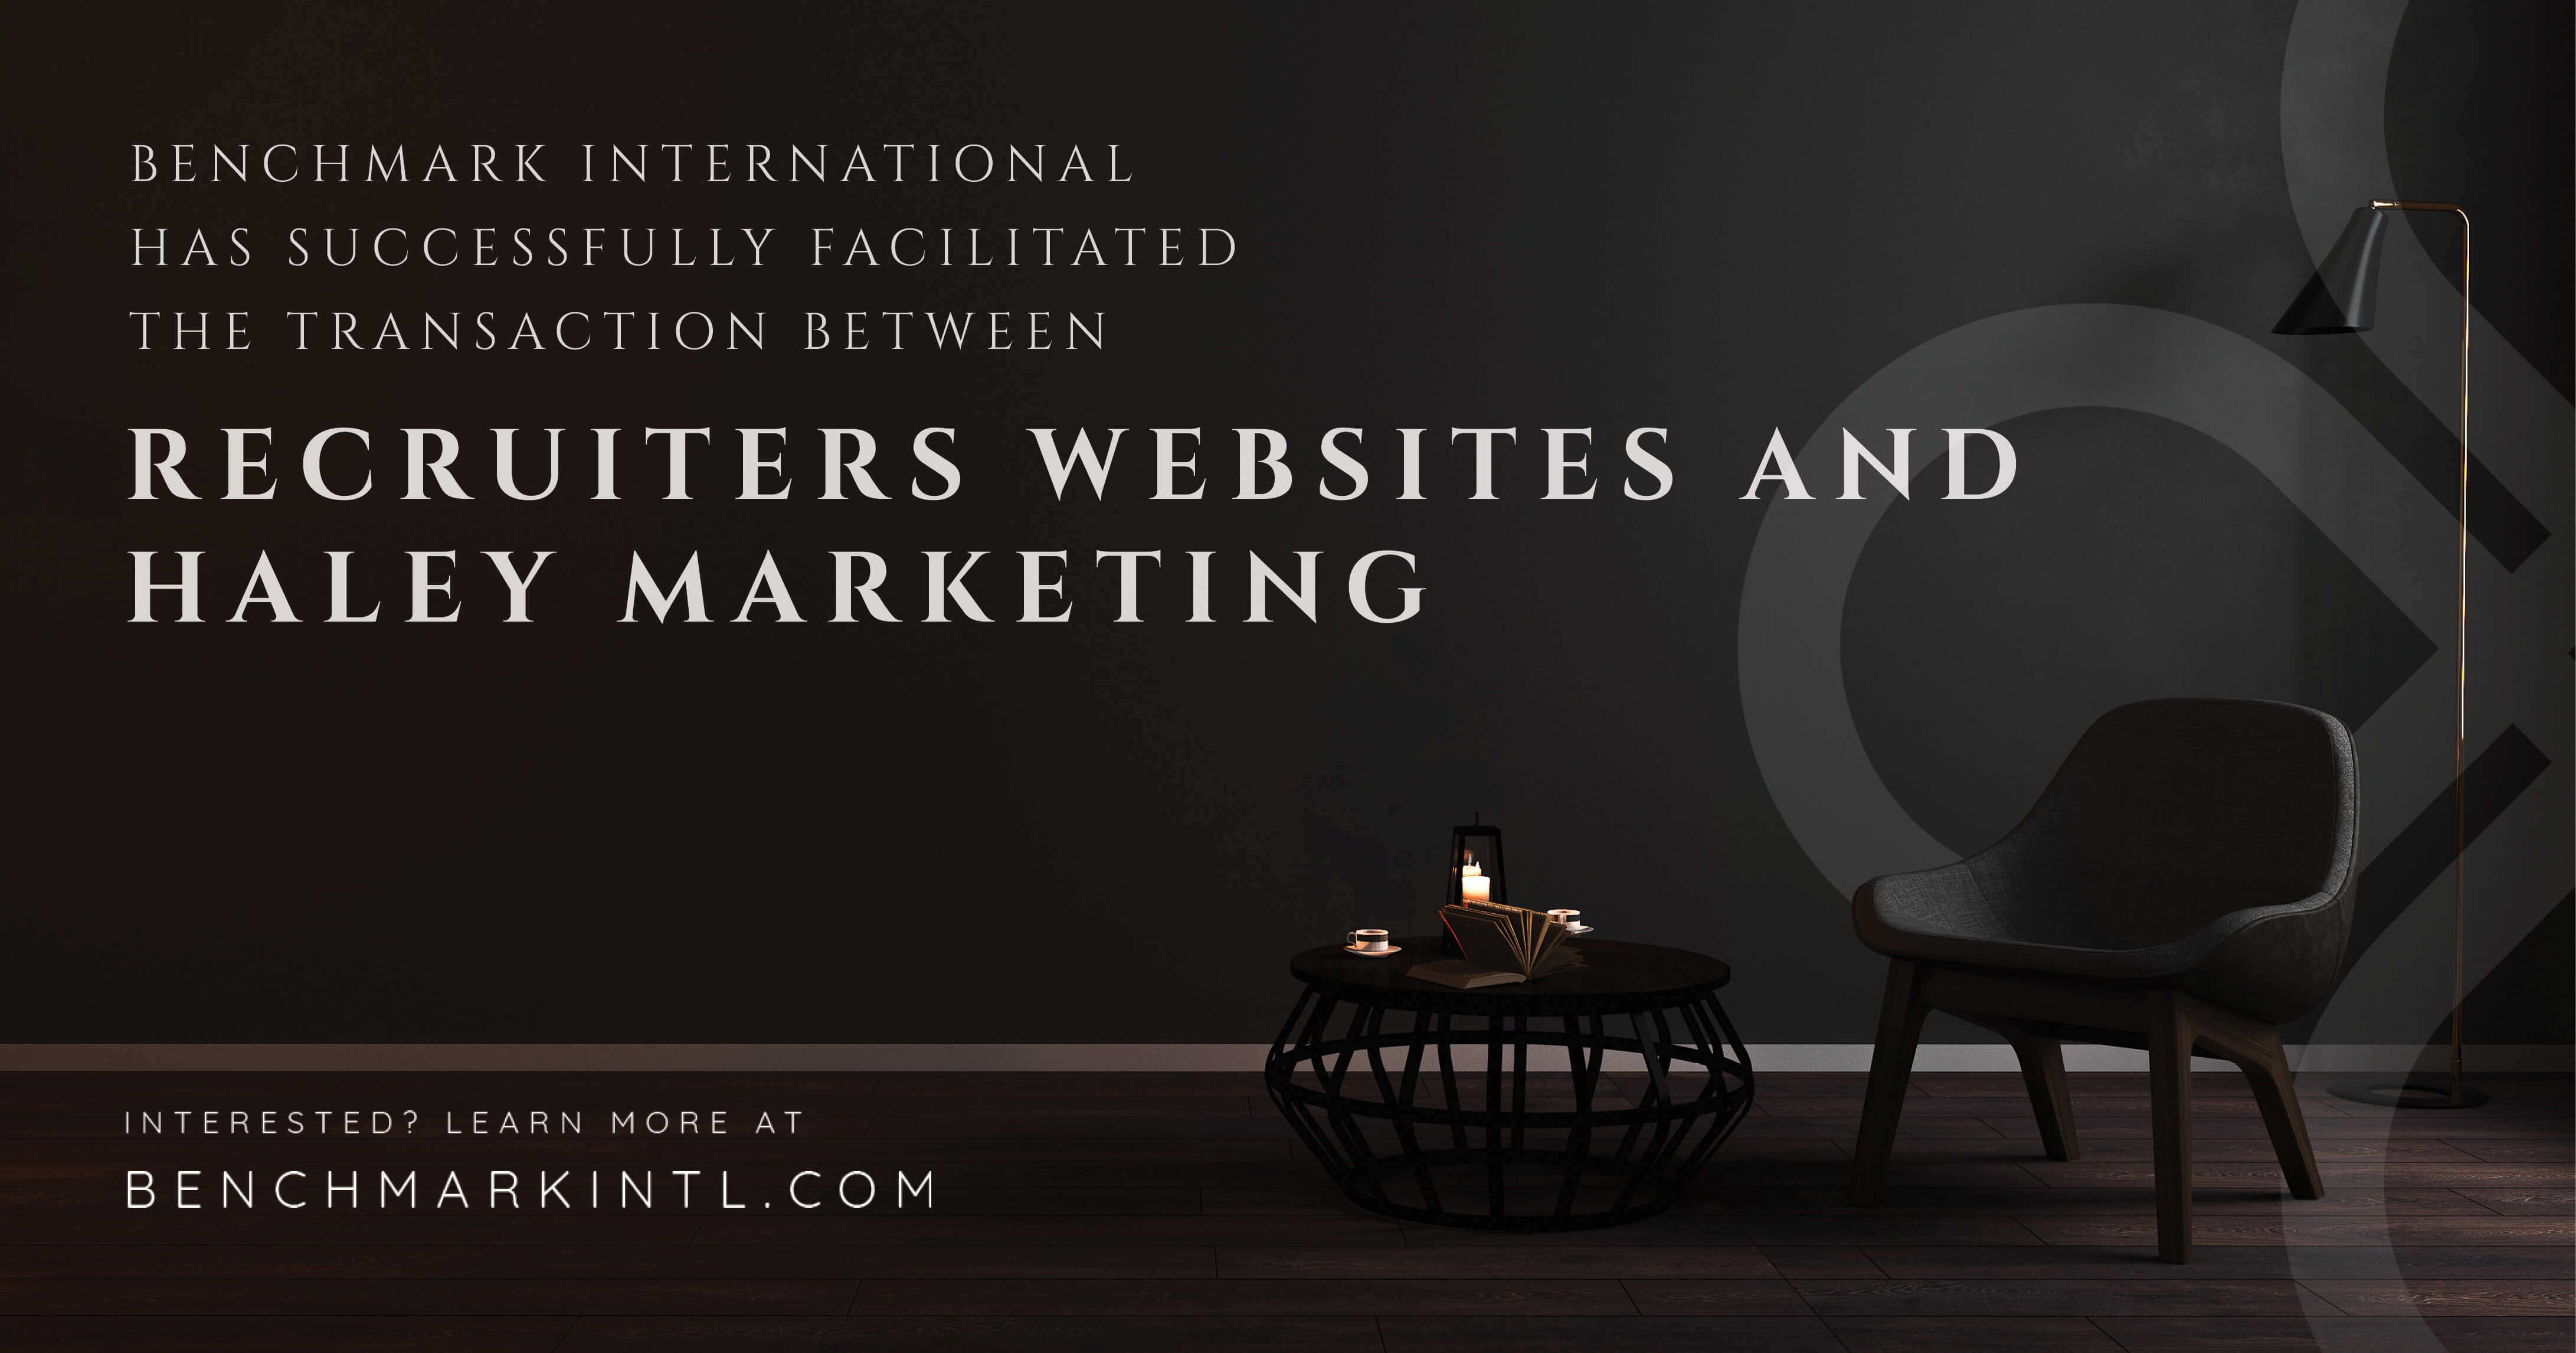 Benchmark International Successfully Facilitated The Transaction Of Recruiters Websites By Haley Marketing